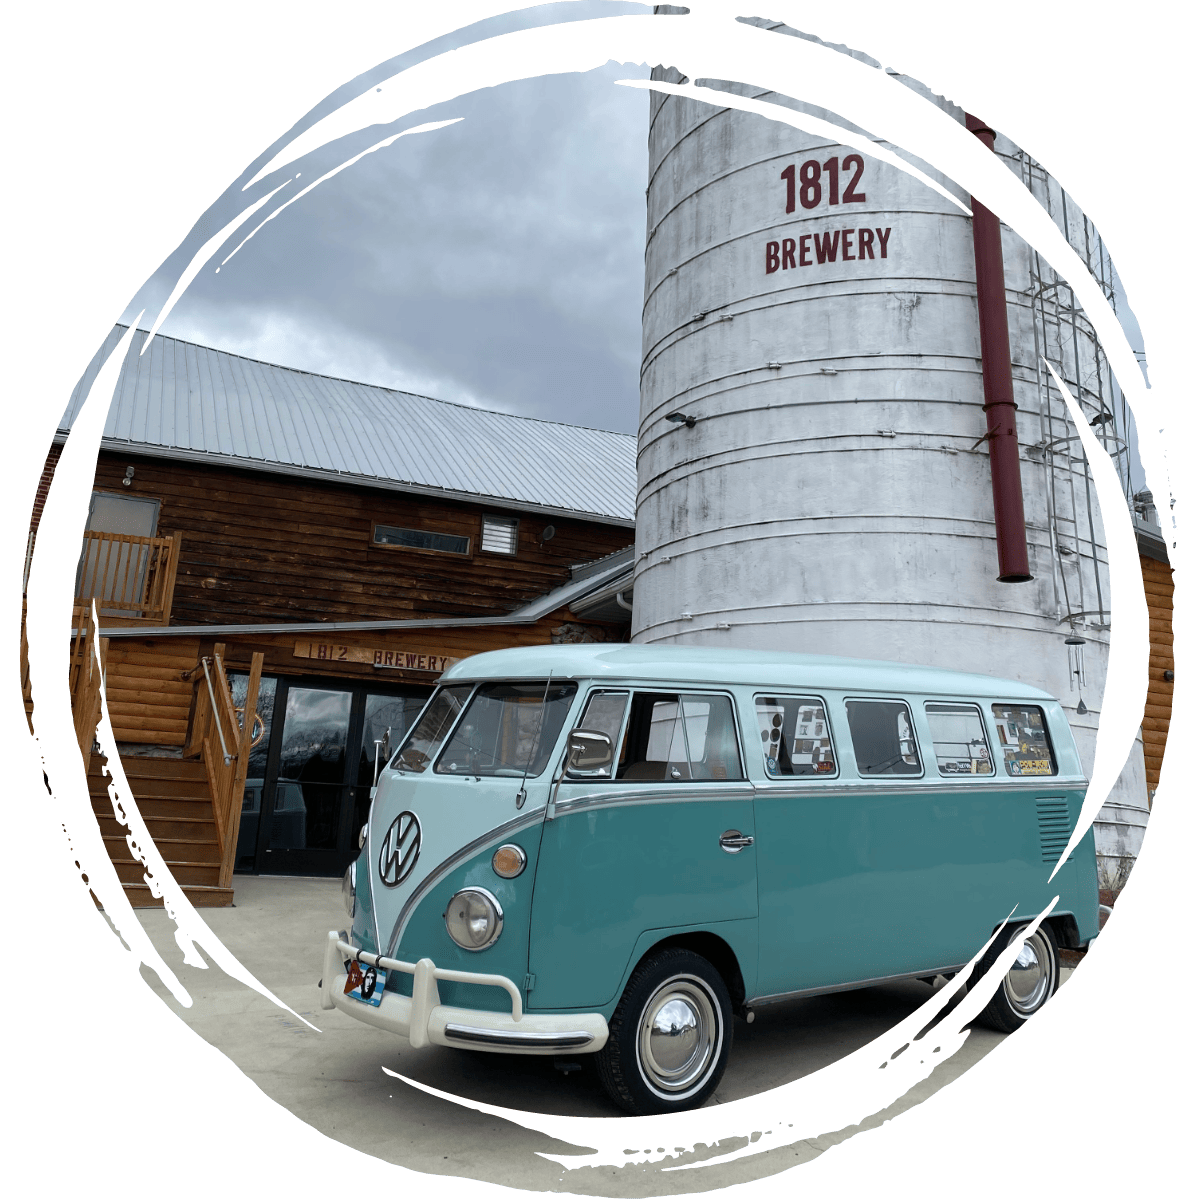 VW van in front of the 1812 Brewery silo.